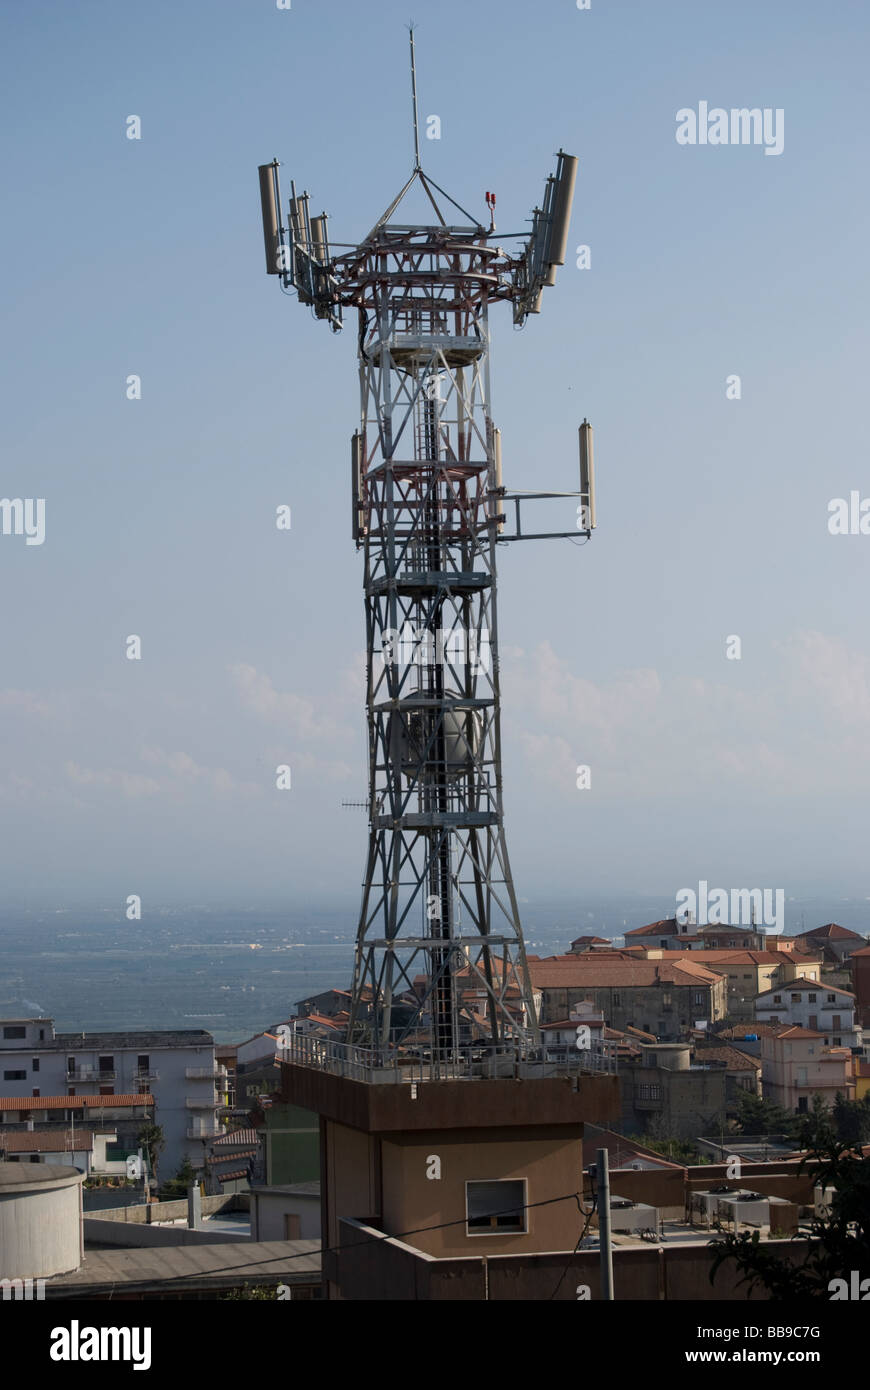 AN ANTENNA FOR TELECOMMUNICATIONS POSITIONED ABOVE THE HOUSES Stock Photo